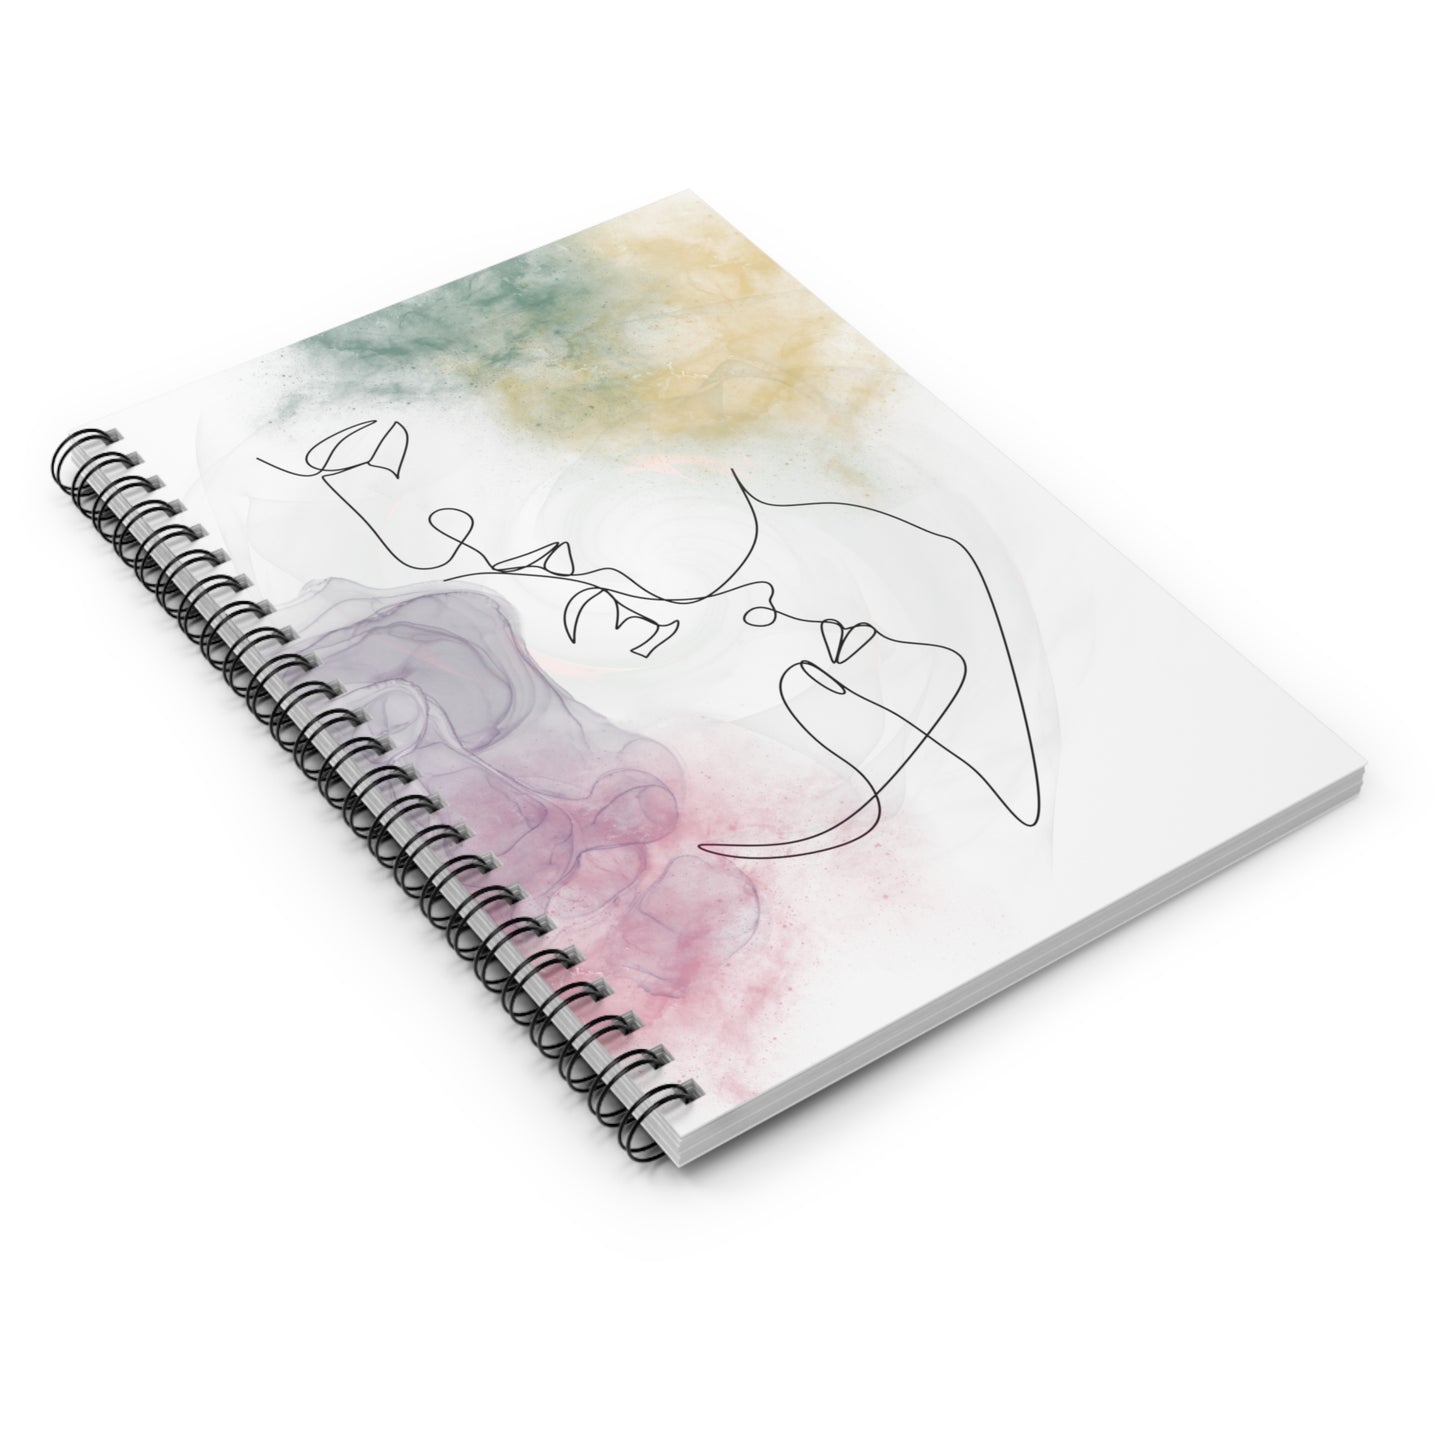 Lover's Kiss: Spiral Notebook - Log Books - Journals - Diaries - and More Custom Printed by TheGlassyLass